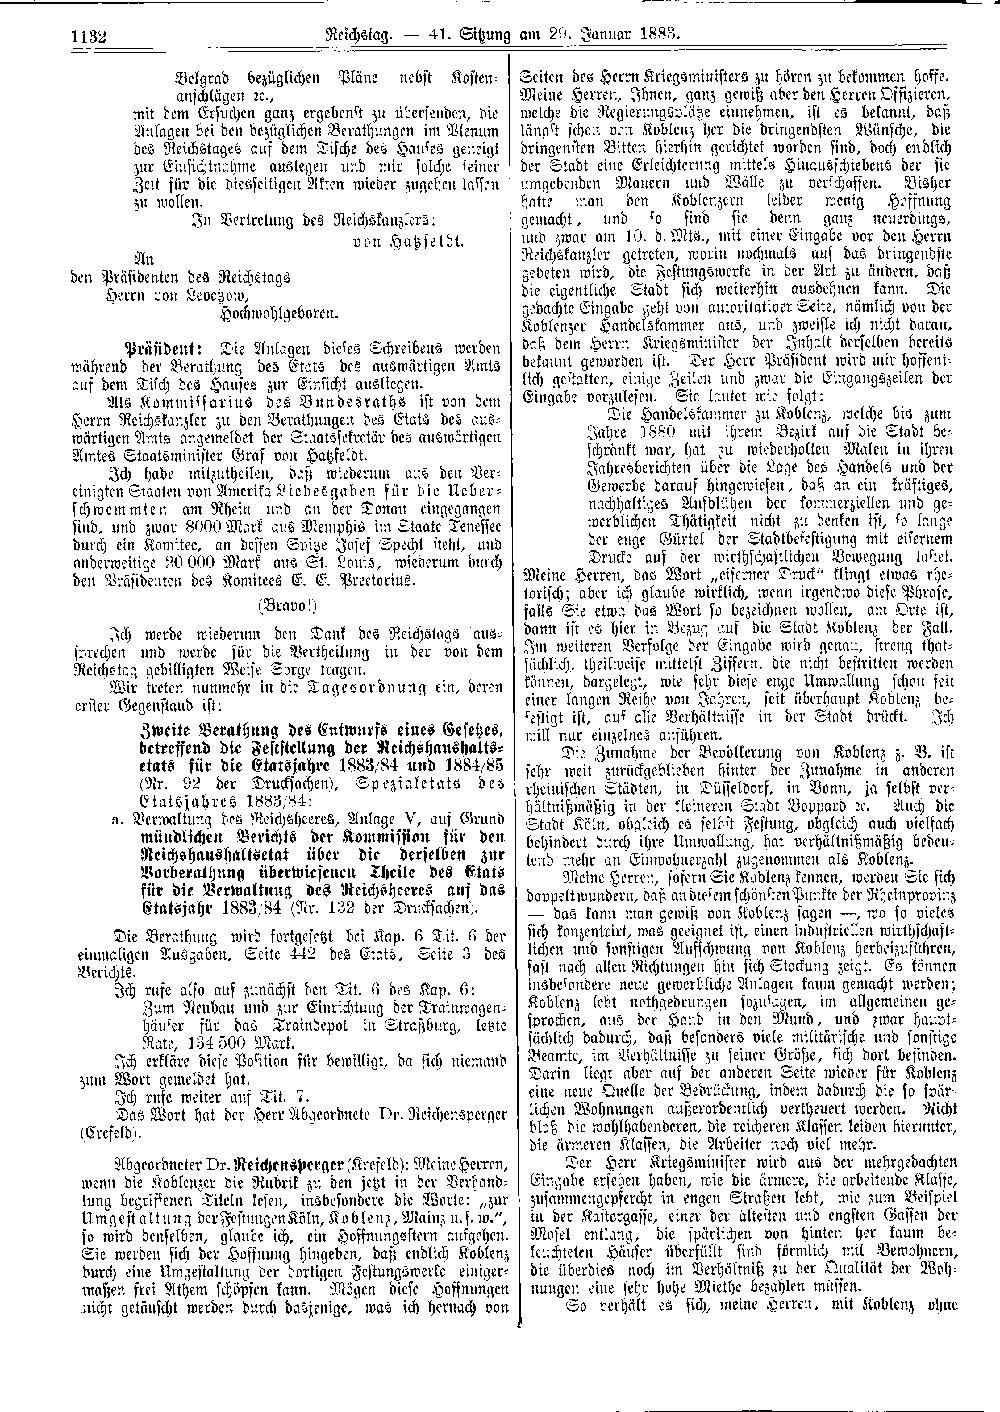 Scan of page 1132